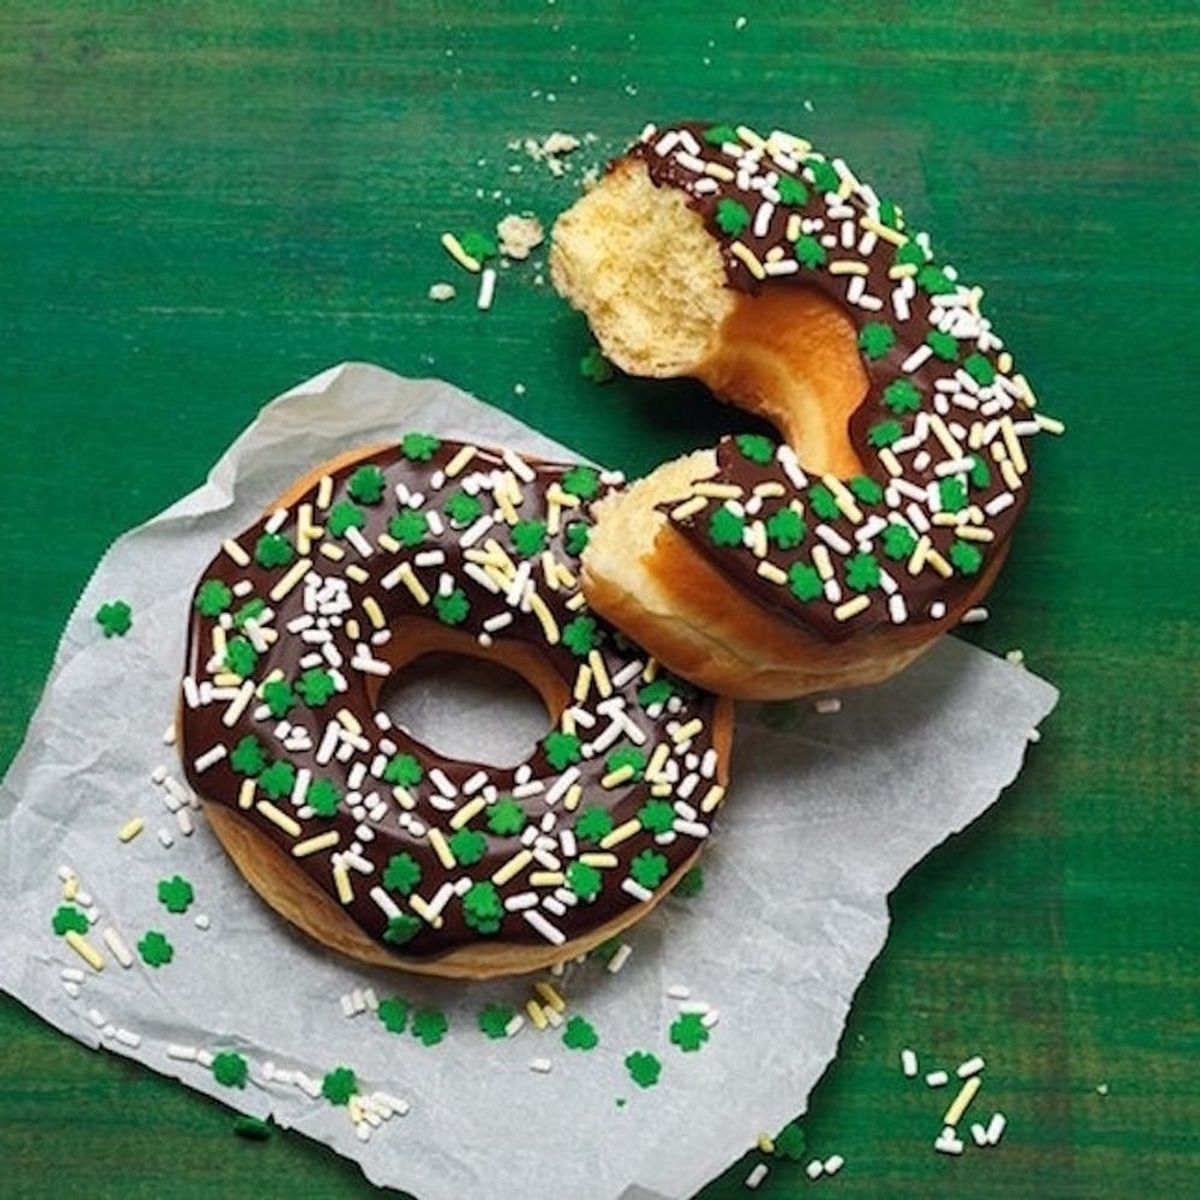 Treat Yo’ Self to These St. Patrick’s Day Specialties from Your Fave Fast Food Spots